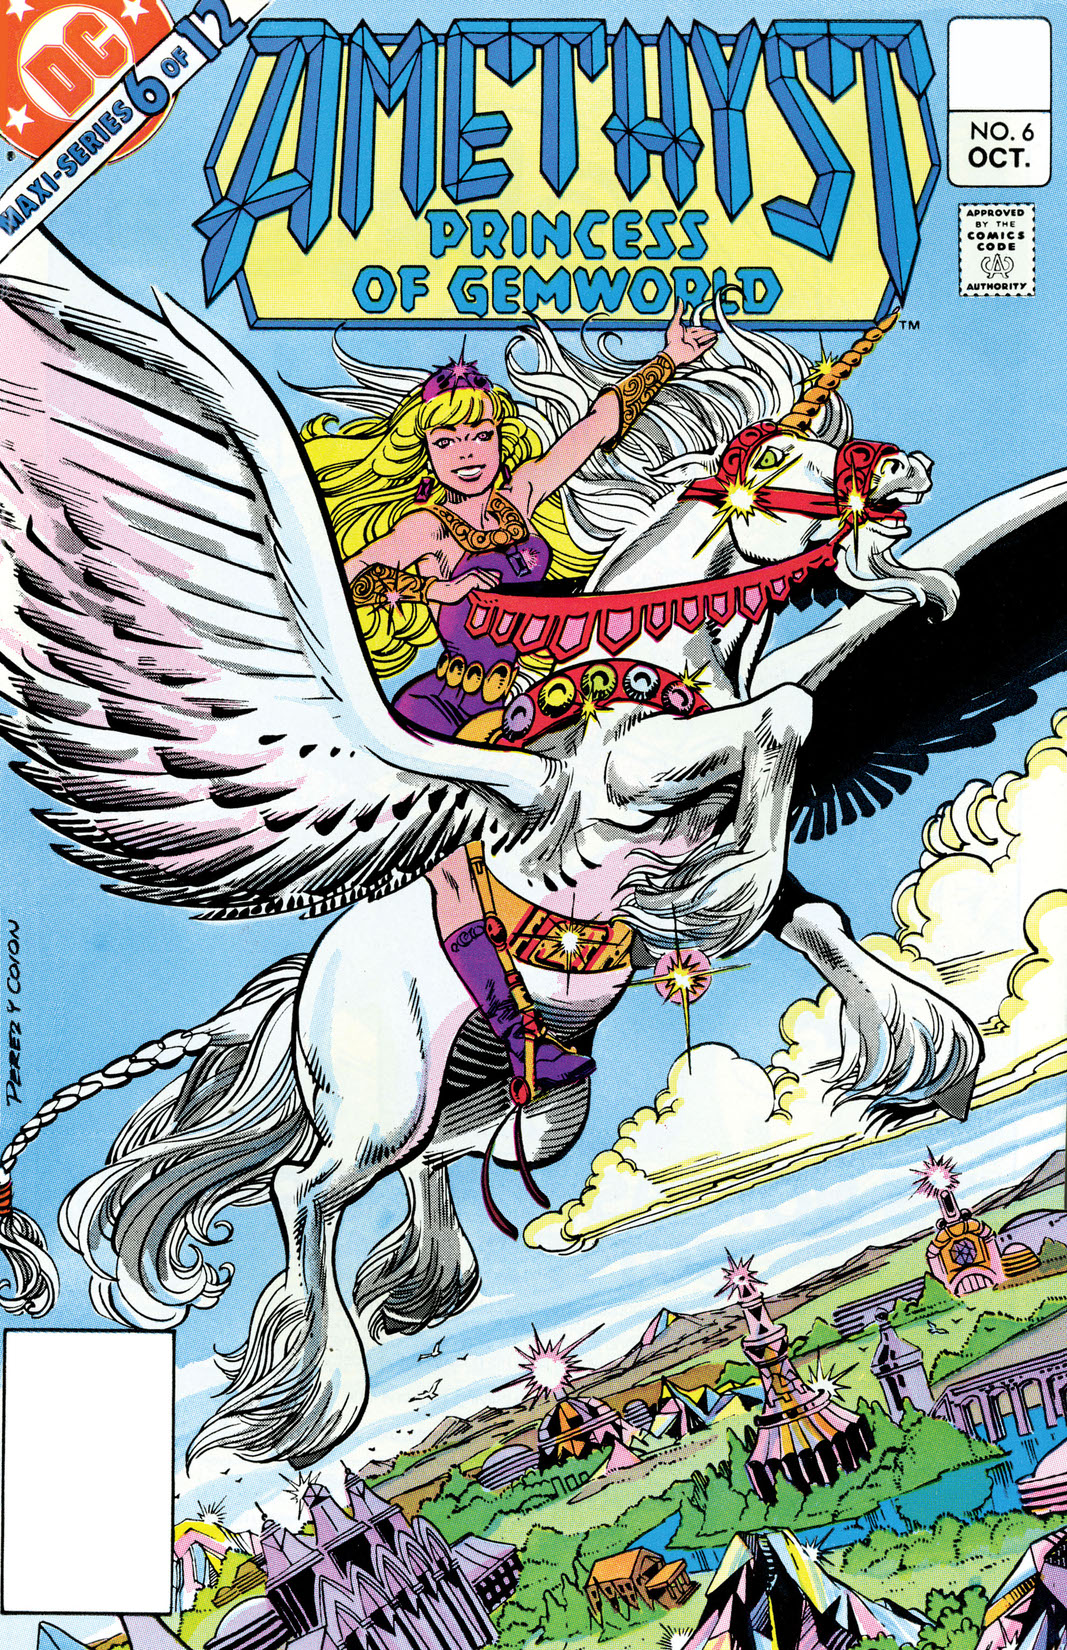 Amethyst: Princess of Gemworld (1983-) #6 preview images